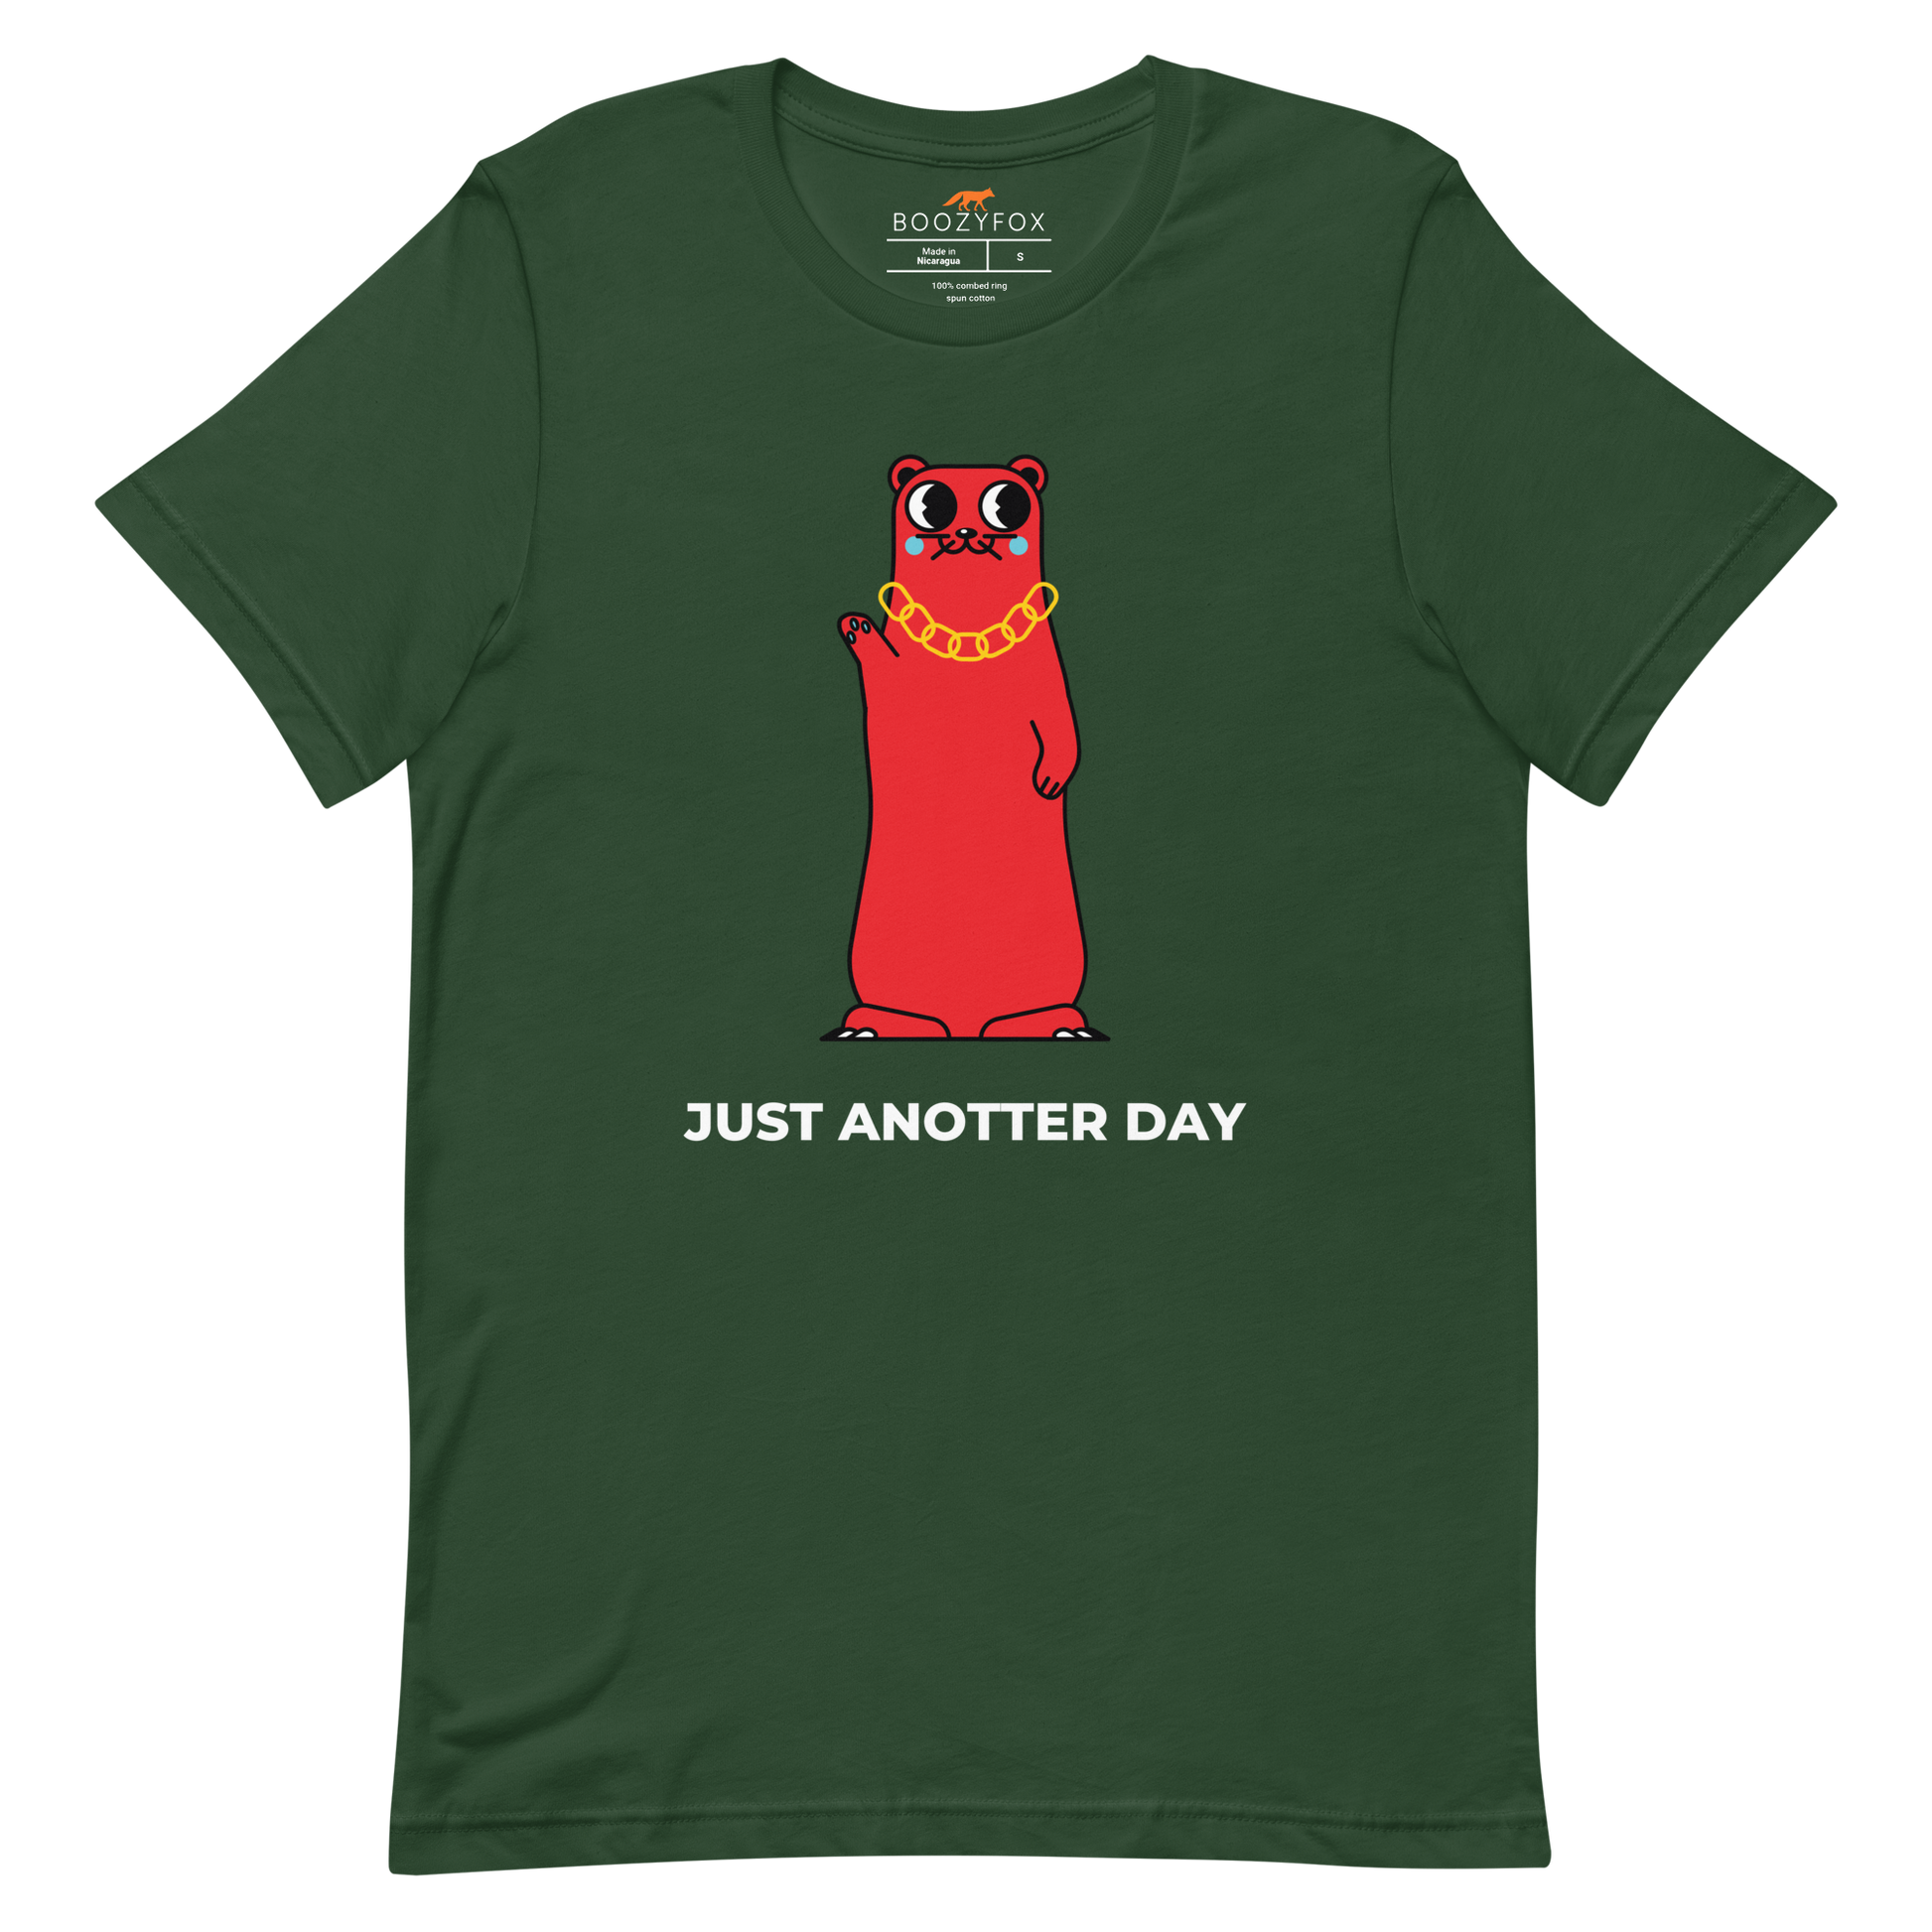 Forest Green Premium Otter T-Shirt featuring a Just Anotter Day graphic on the chest - Funny Graphic Otter Tees - Boozy Fox